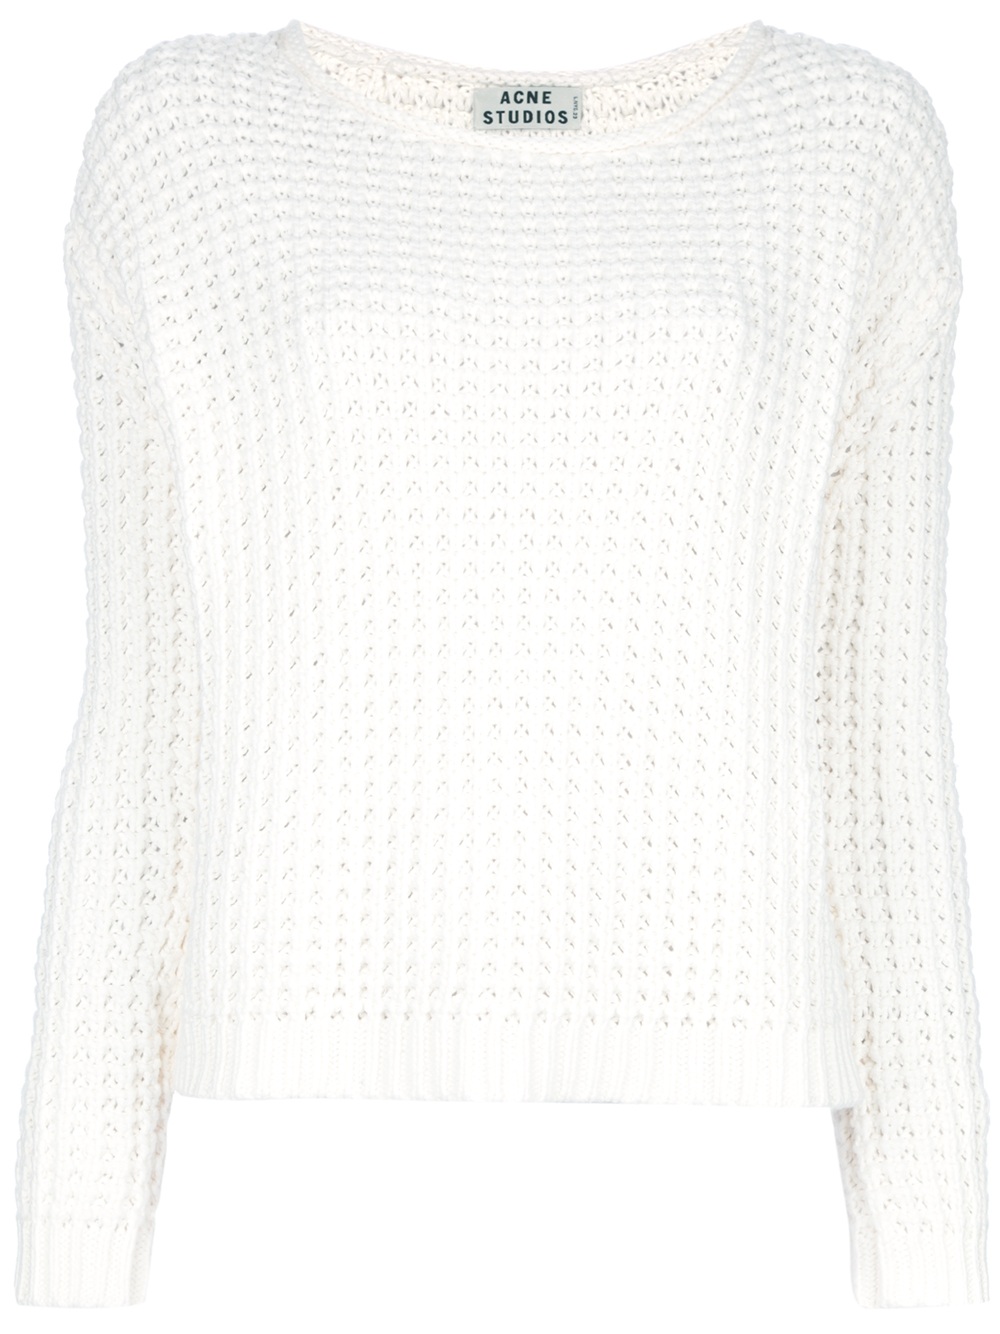 Acne Studios Sapata Solid Sweater in White | Lyst